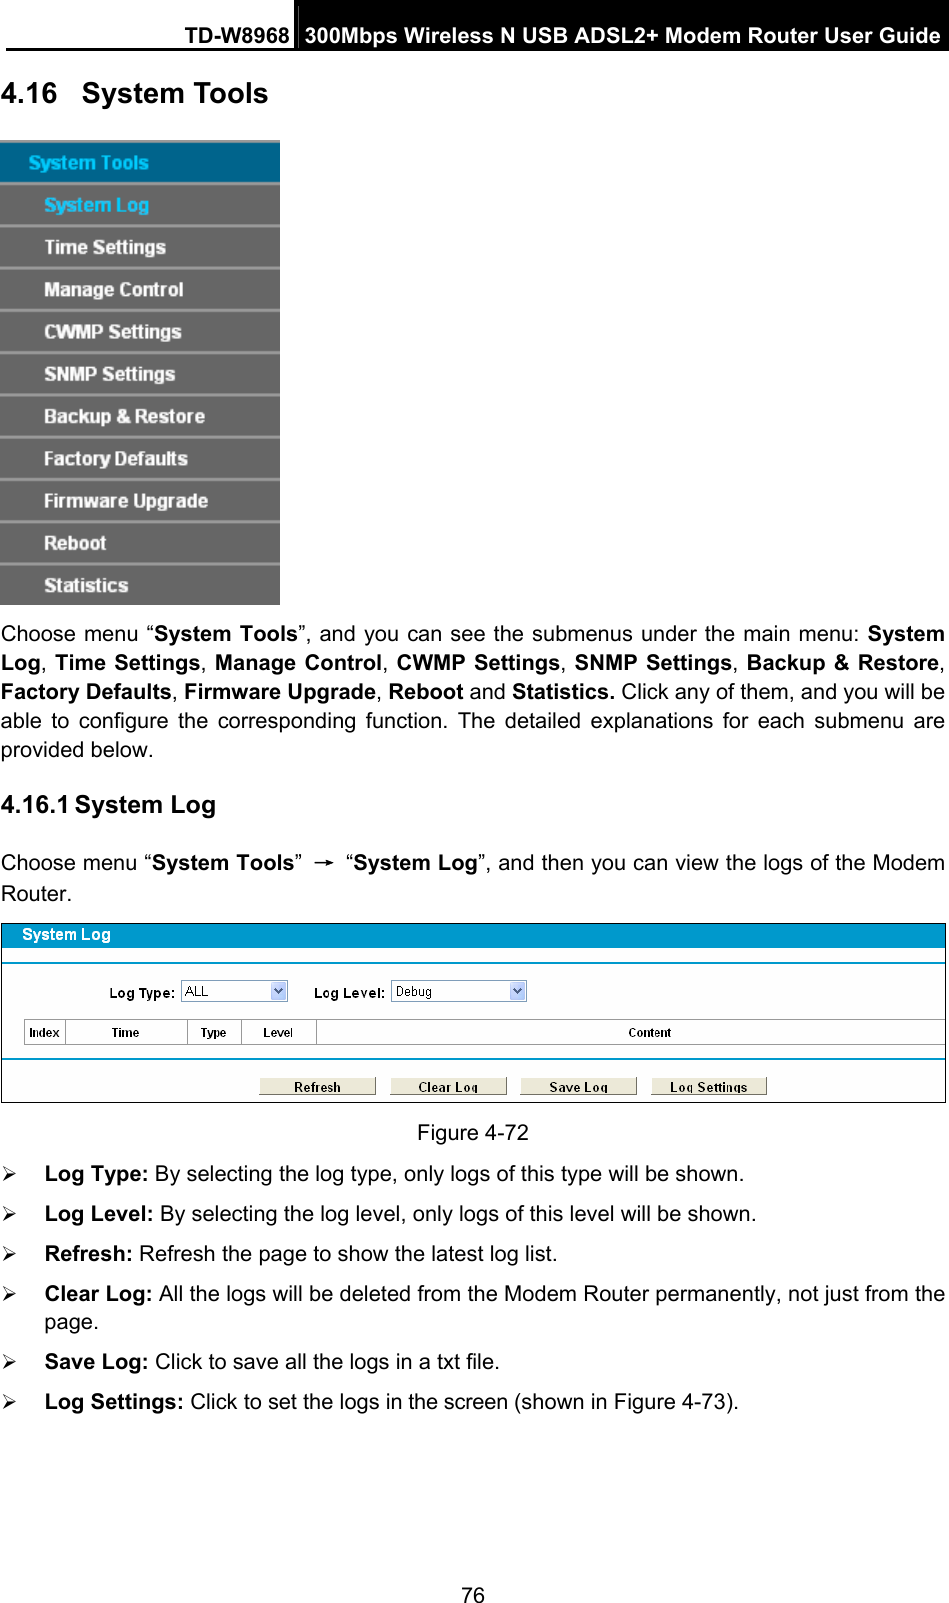 TD-W8968  300Mbps Wireless N USB ADSL2+ Modem Router User Guide 76 4.16  System Tools  Choose menu “System Tools”, and you can see the submenus under the main menu: System Log, Time Settings, Manage Control, CWMP Settings, SNMP Settings, Backup &amp; Restore, Factory Defaults, Firmware Upgrade, Reboot and Statistics. Click any of them, and you will be able to configure the corresponding function. The detailed explanations for each submenu are provided below. 4.16.1 System Log Choose menu “System Tools” → “System Log”, and then you can view the logs of the Modem Router.  Figure 4-72   ¾ Log Type: By selecting the log type, only logs of this type will be shown. ¾ Log Level: By selecting the log level, only logs of this level will be shown. ¾ Refresh: Refresh the page to show the latest log list. ¾ Clear Log: All the logs will be deleted from the Modem Router permanently, not just from the page.  ¾ Save Log: Click to save all the logs in a txt file.   ¾ Log Settings: Click to set the logs in the screen (shown in Figure 4-73). 